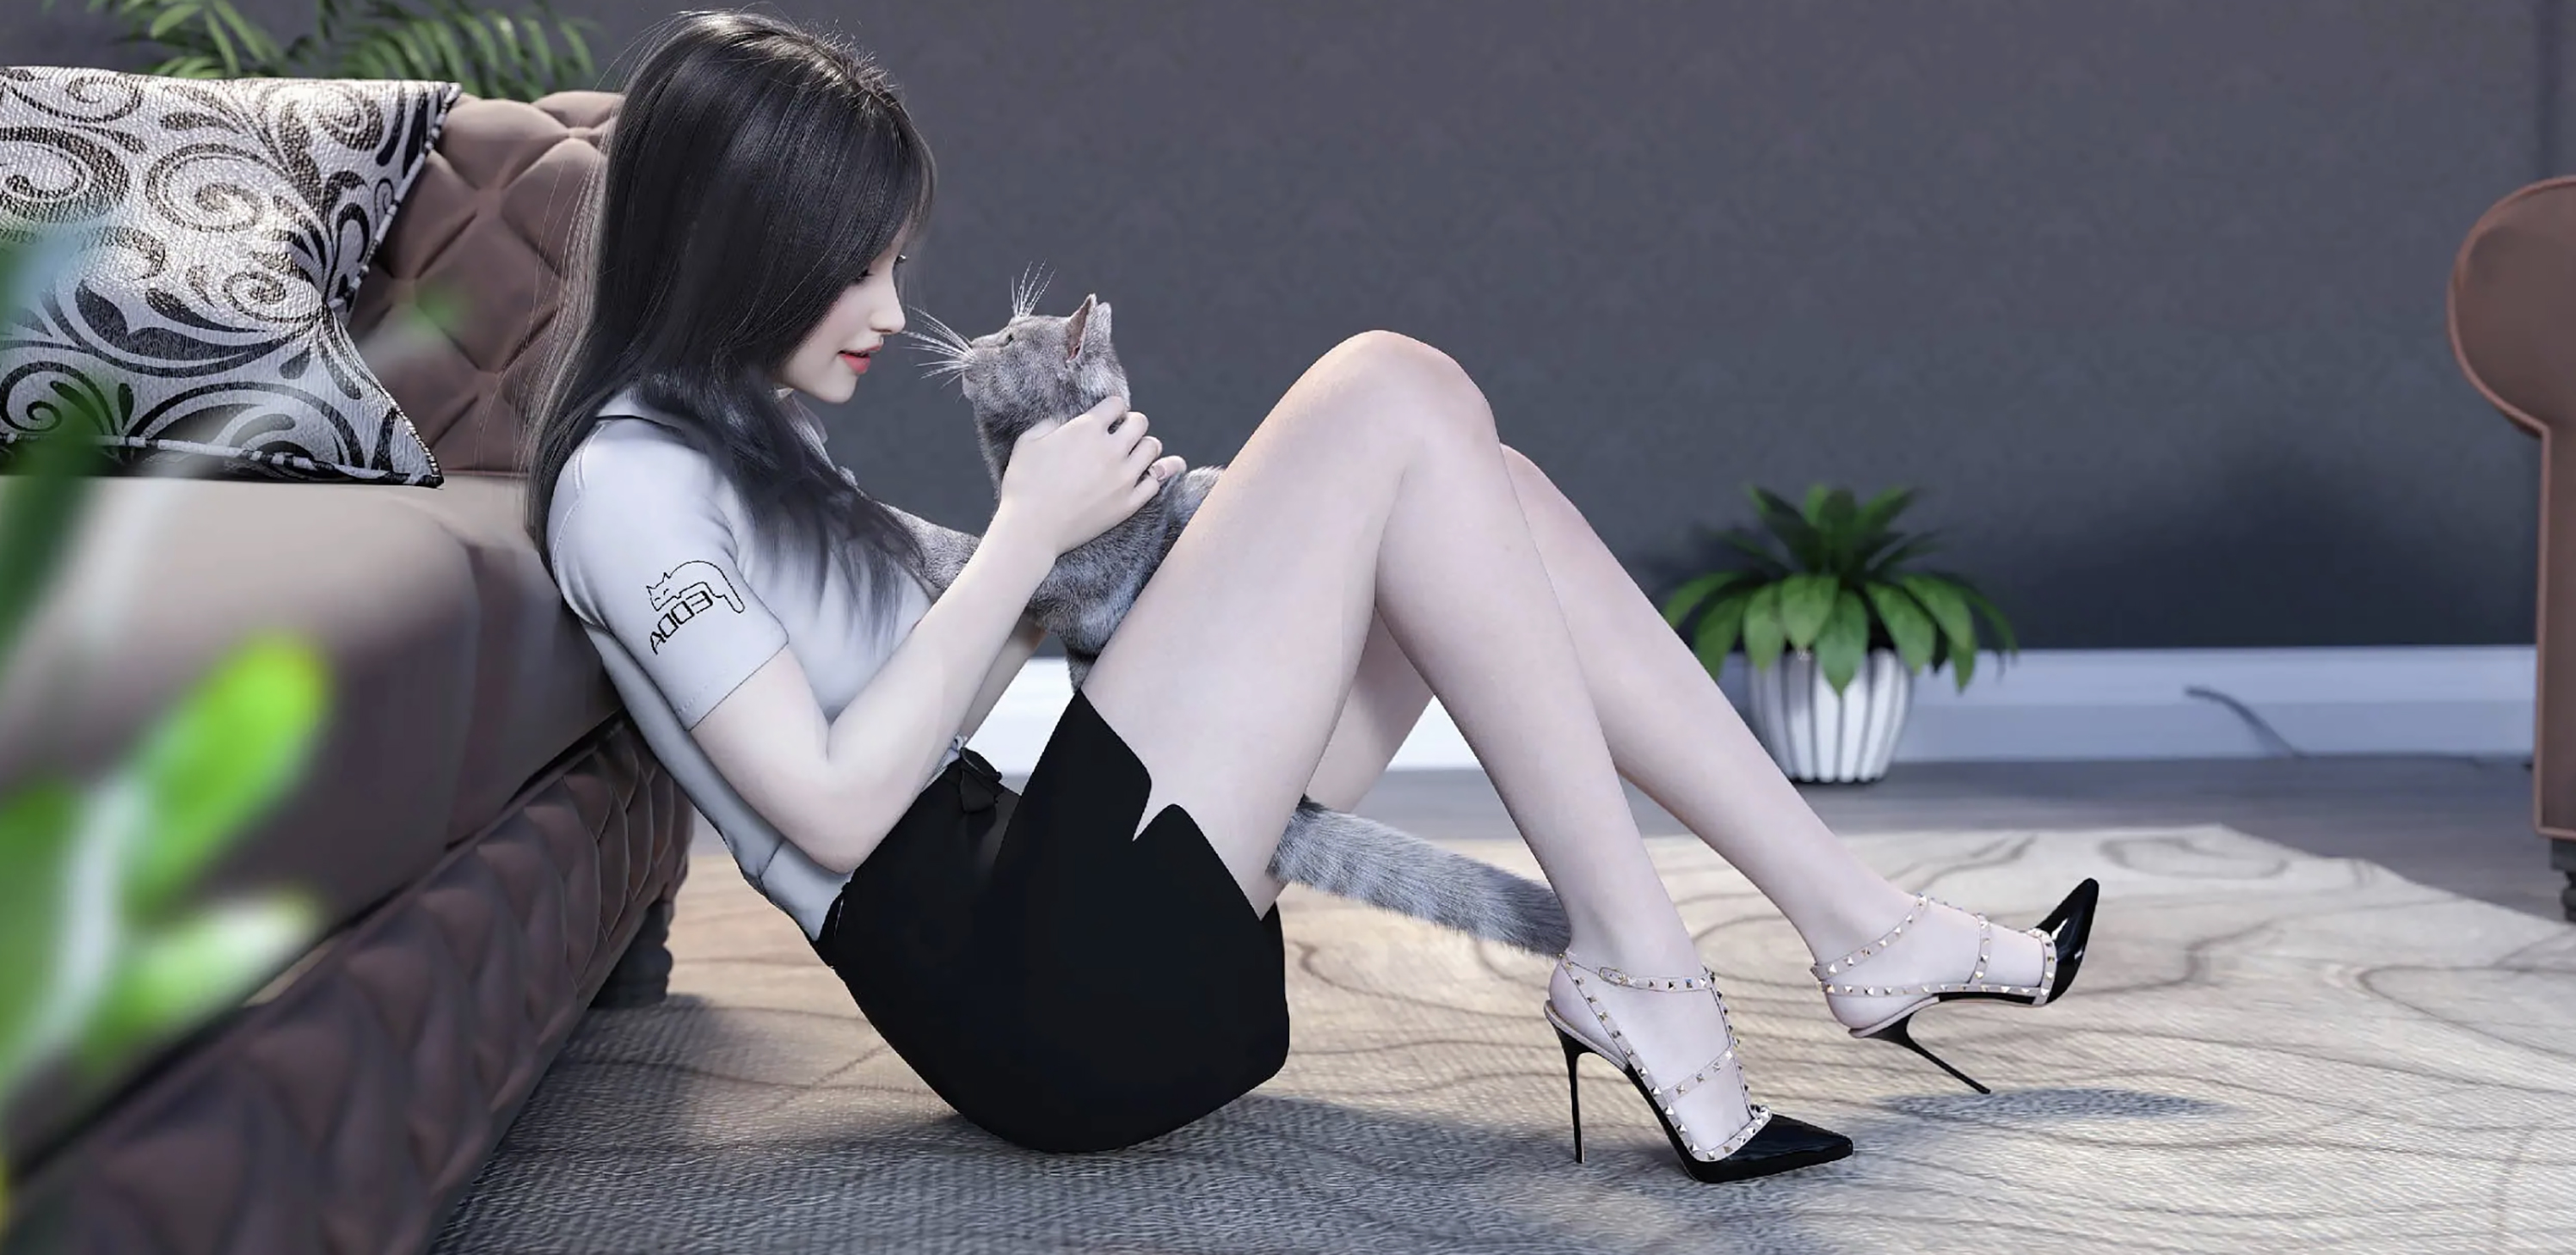 Kitty Stilettoes CGi Asian Heels Animals Couch Plants Leaves 2995x1459